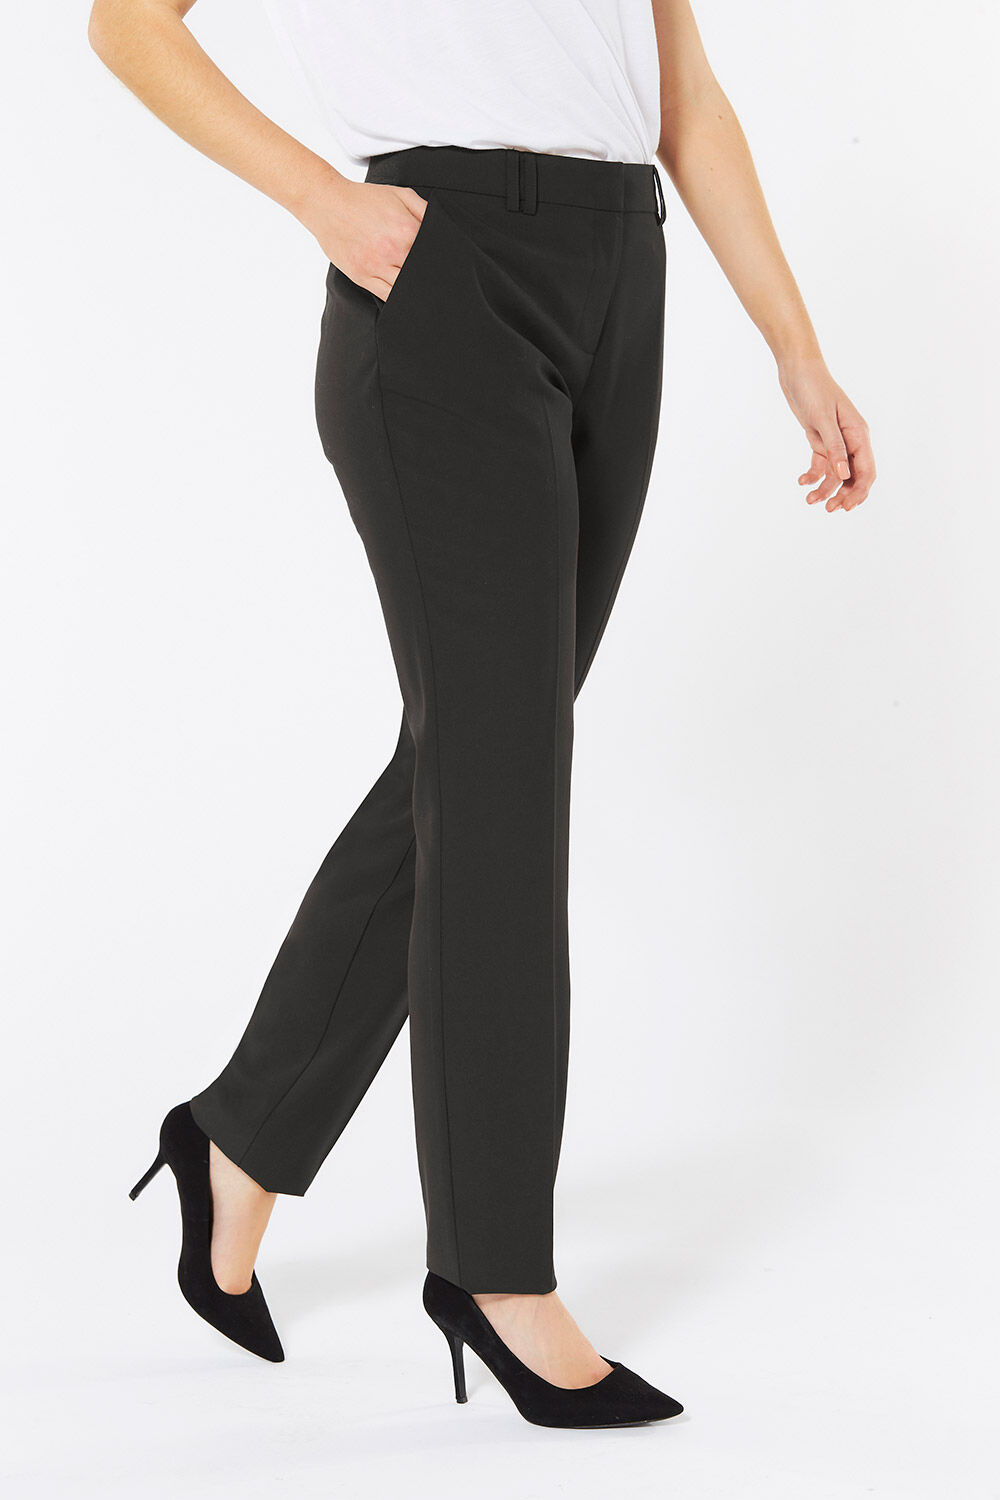 Yours Womens Black Leg Pull On Stretch Tapered Leg Trousers UK Size 24 for  sale online  eBay